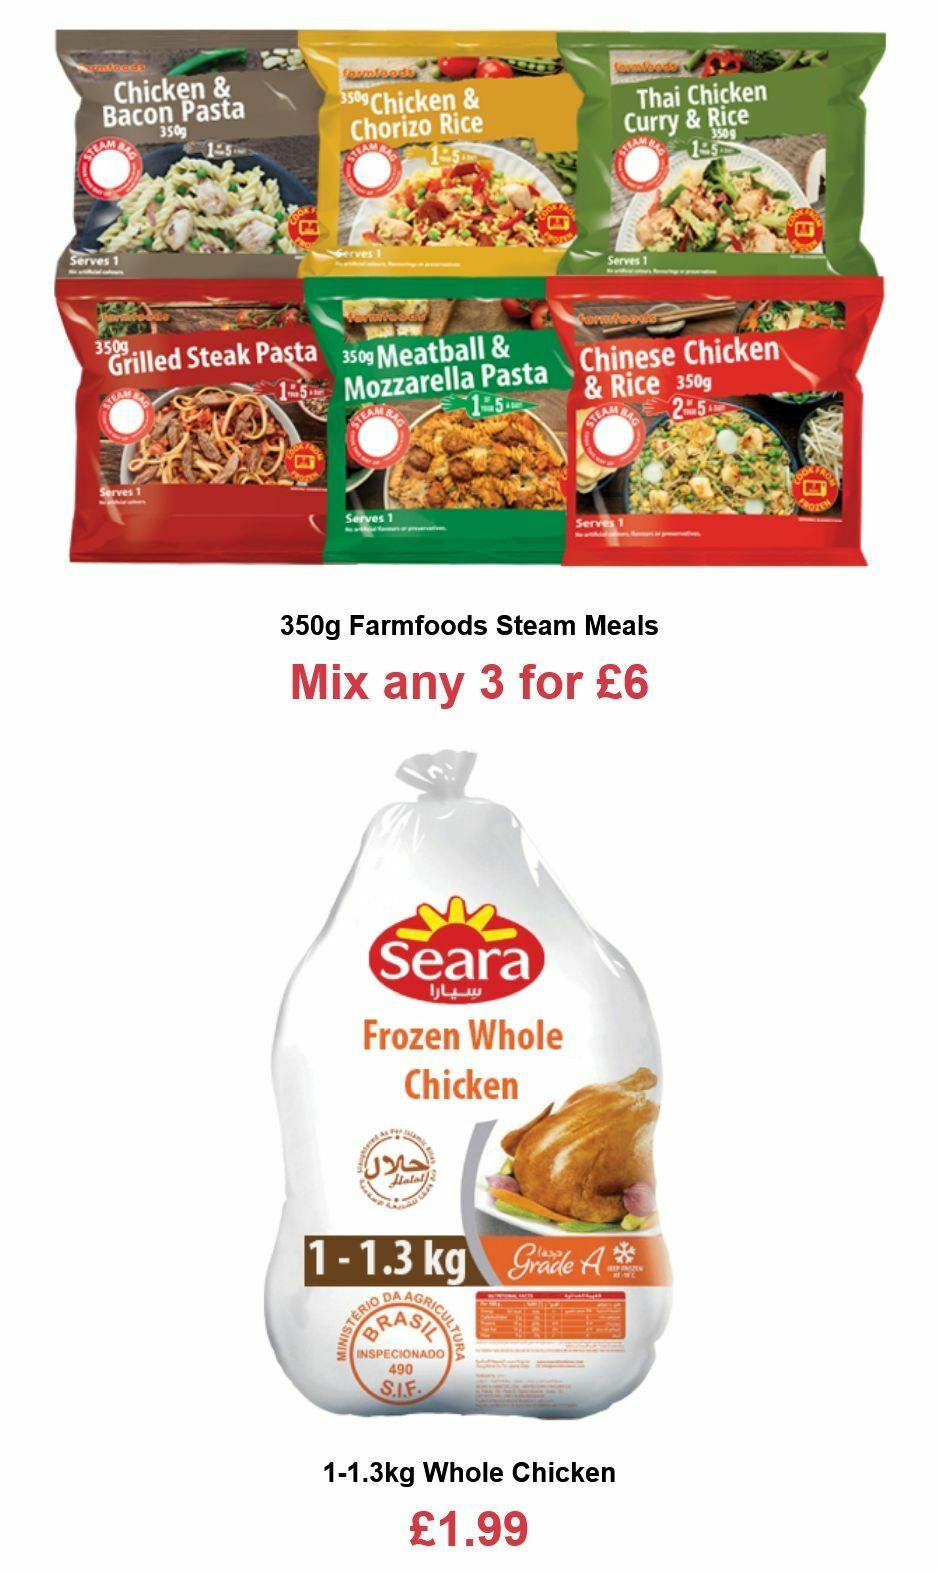 Farmfoods Offers from 31 July